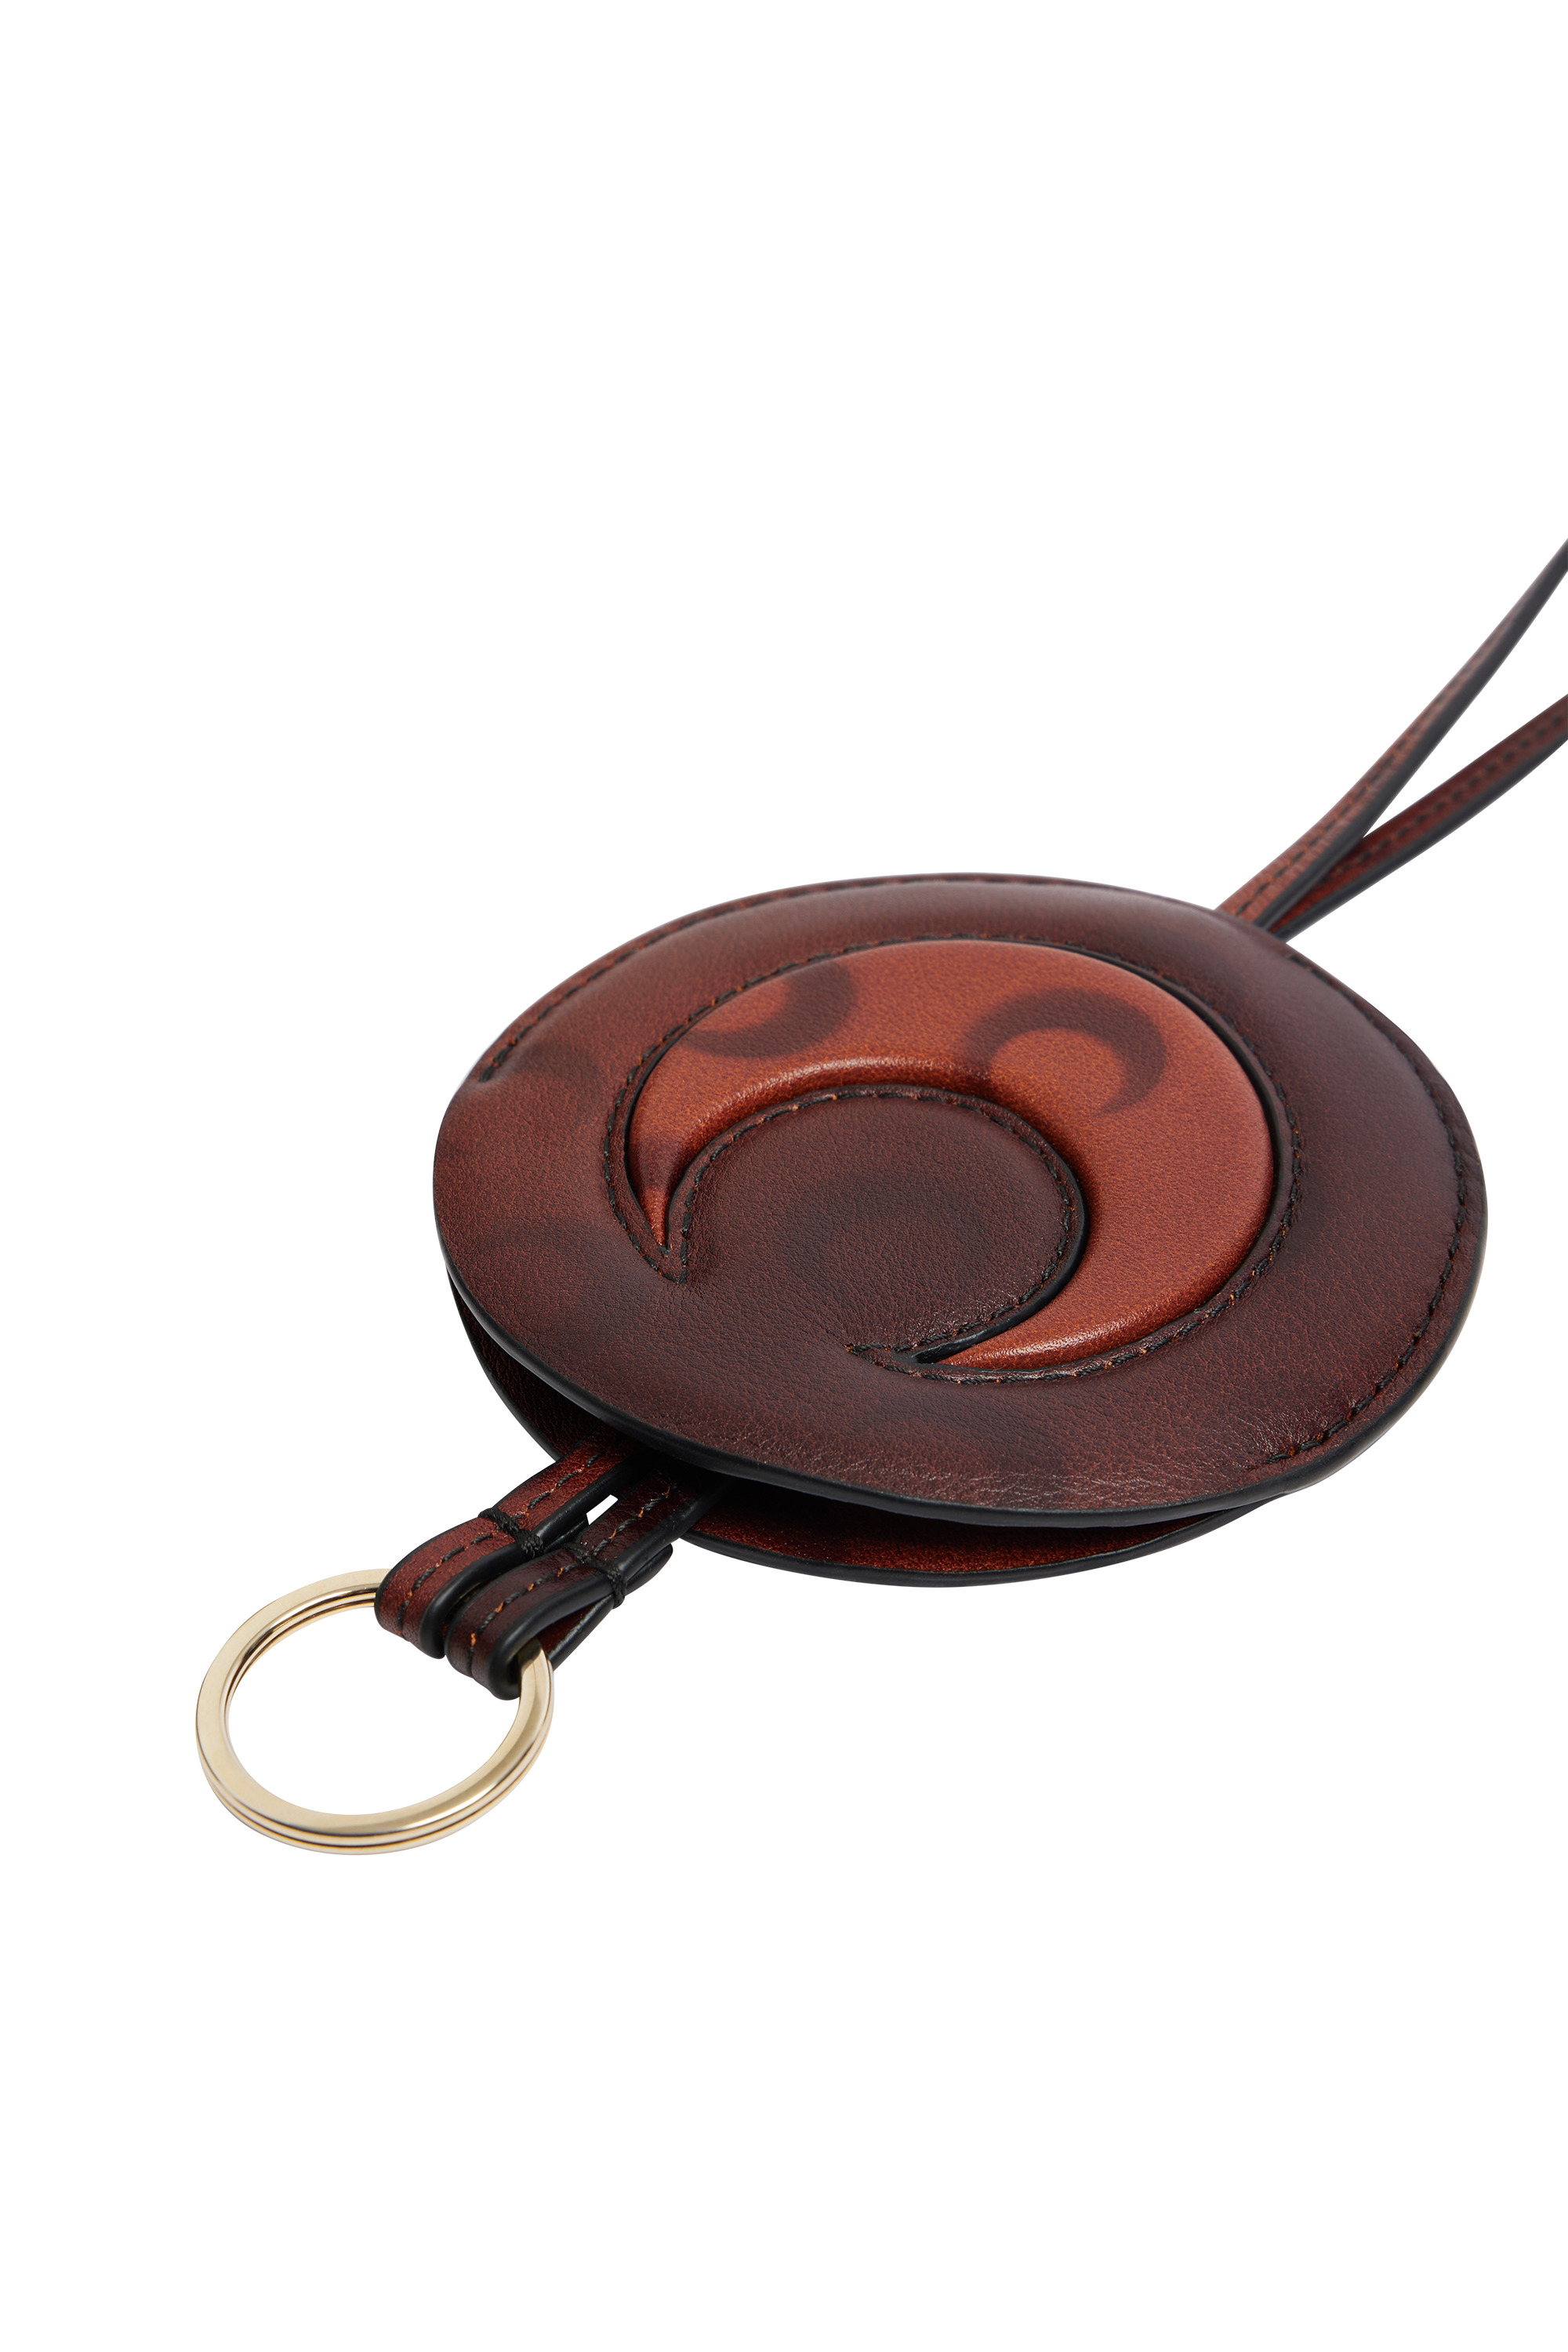 Airbrushed Crafted Leather Key Holder - 2